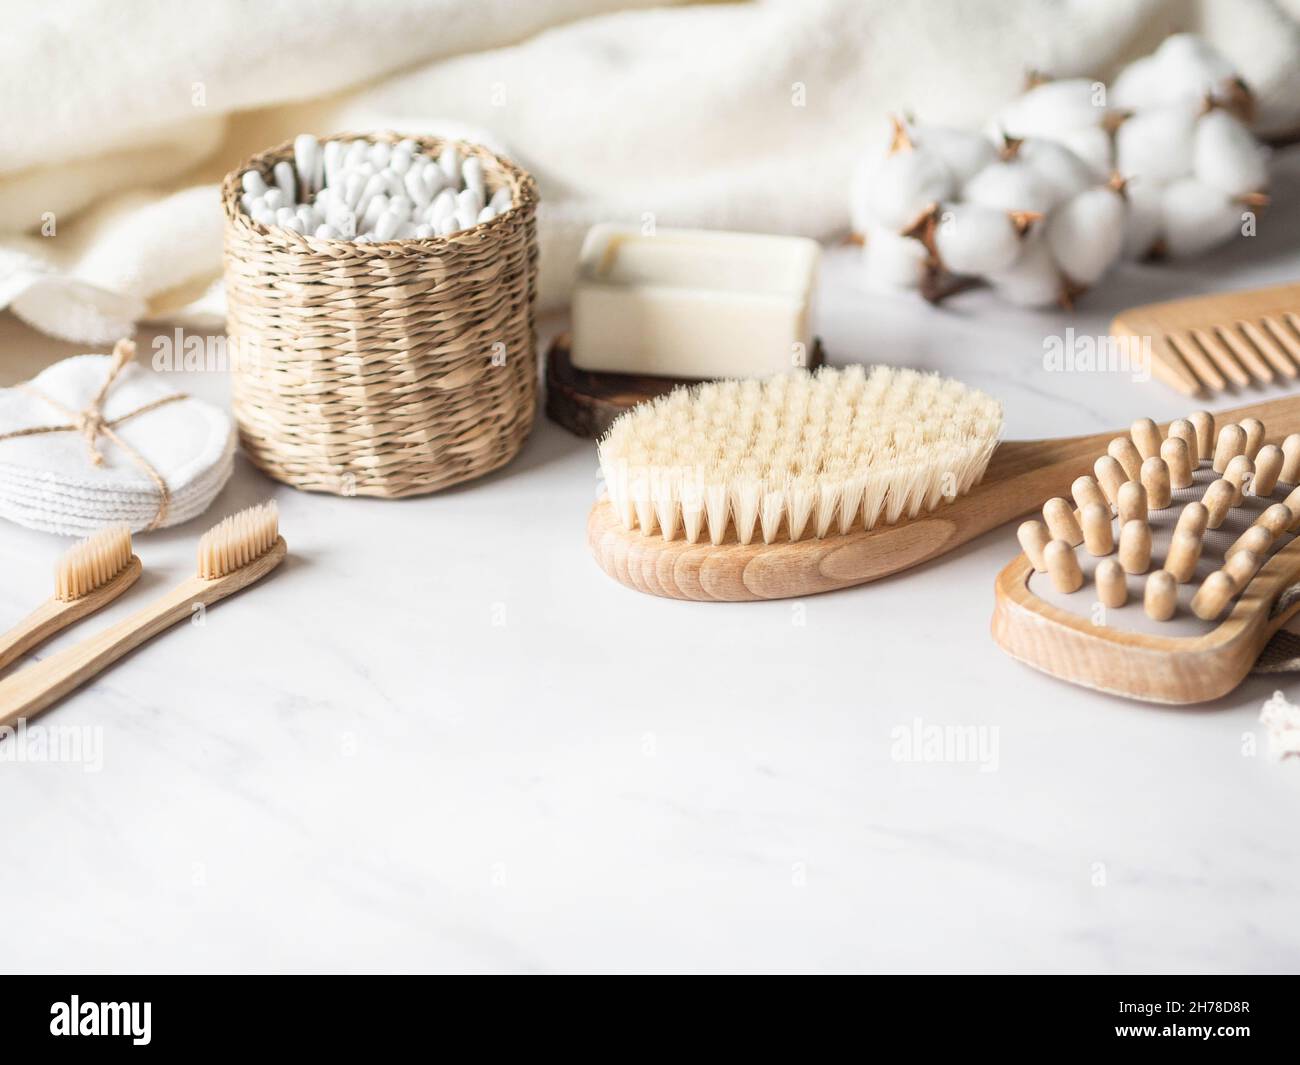 Zero waste personal bathroom accessories. Wooden brush, soap, toothbrush, cotton towel on marble background. Free plastic concept. Eco-friendly home c Stock Photo